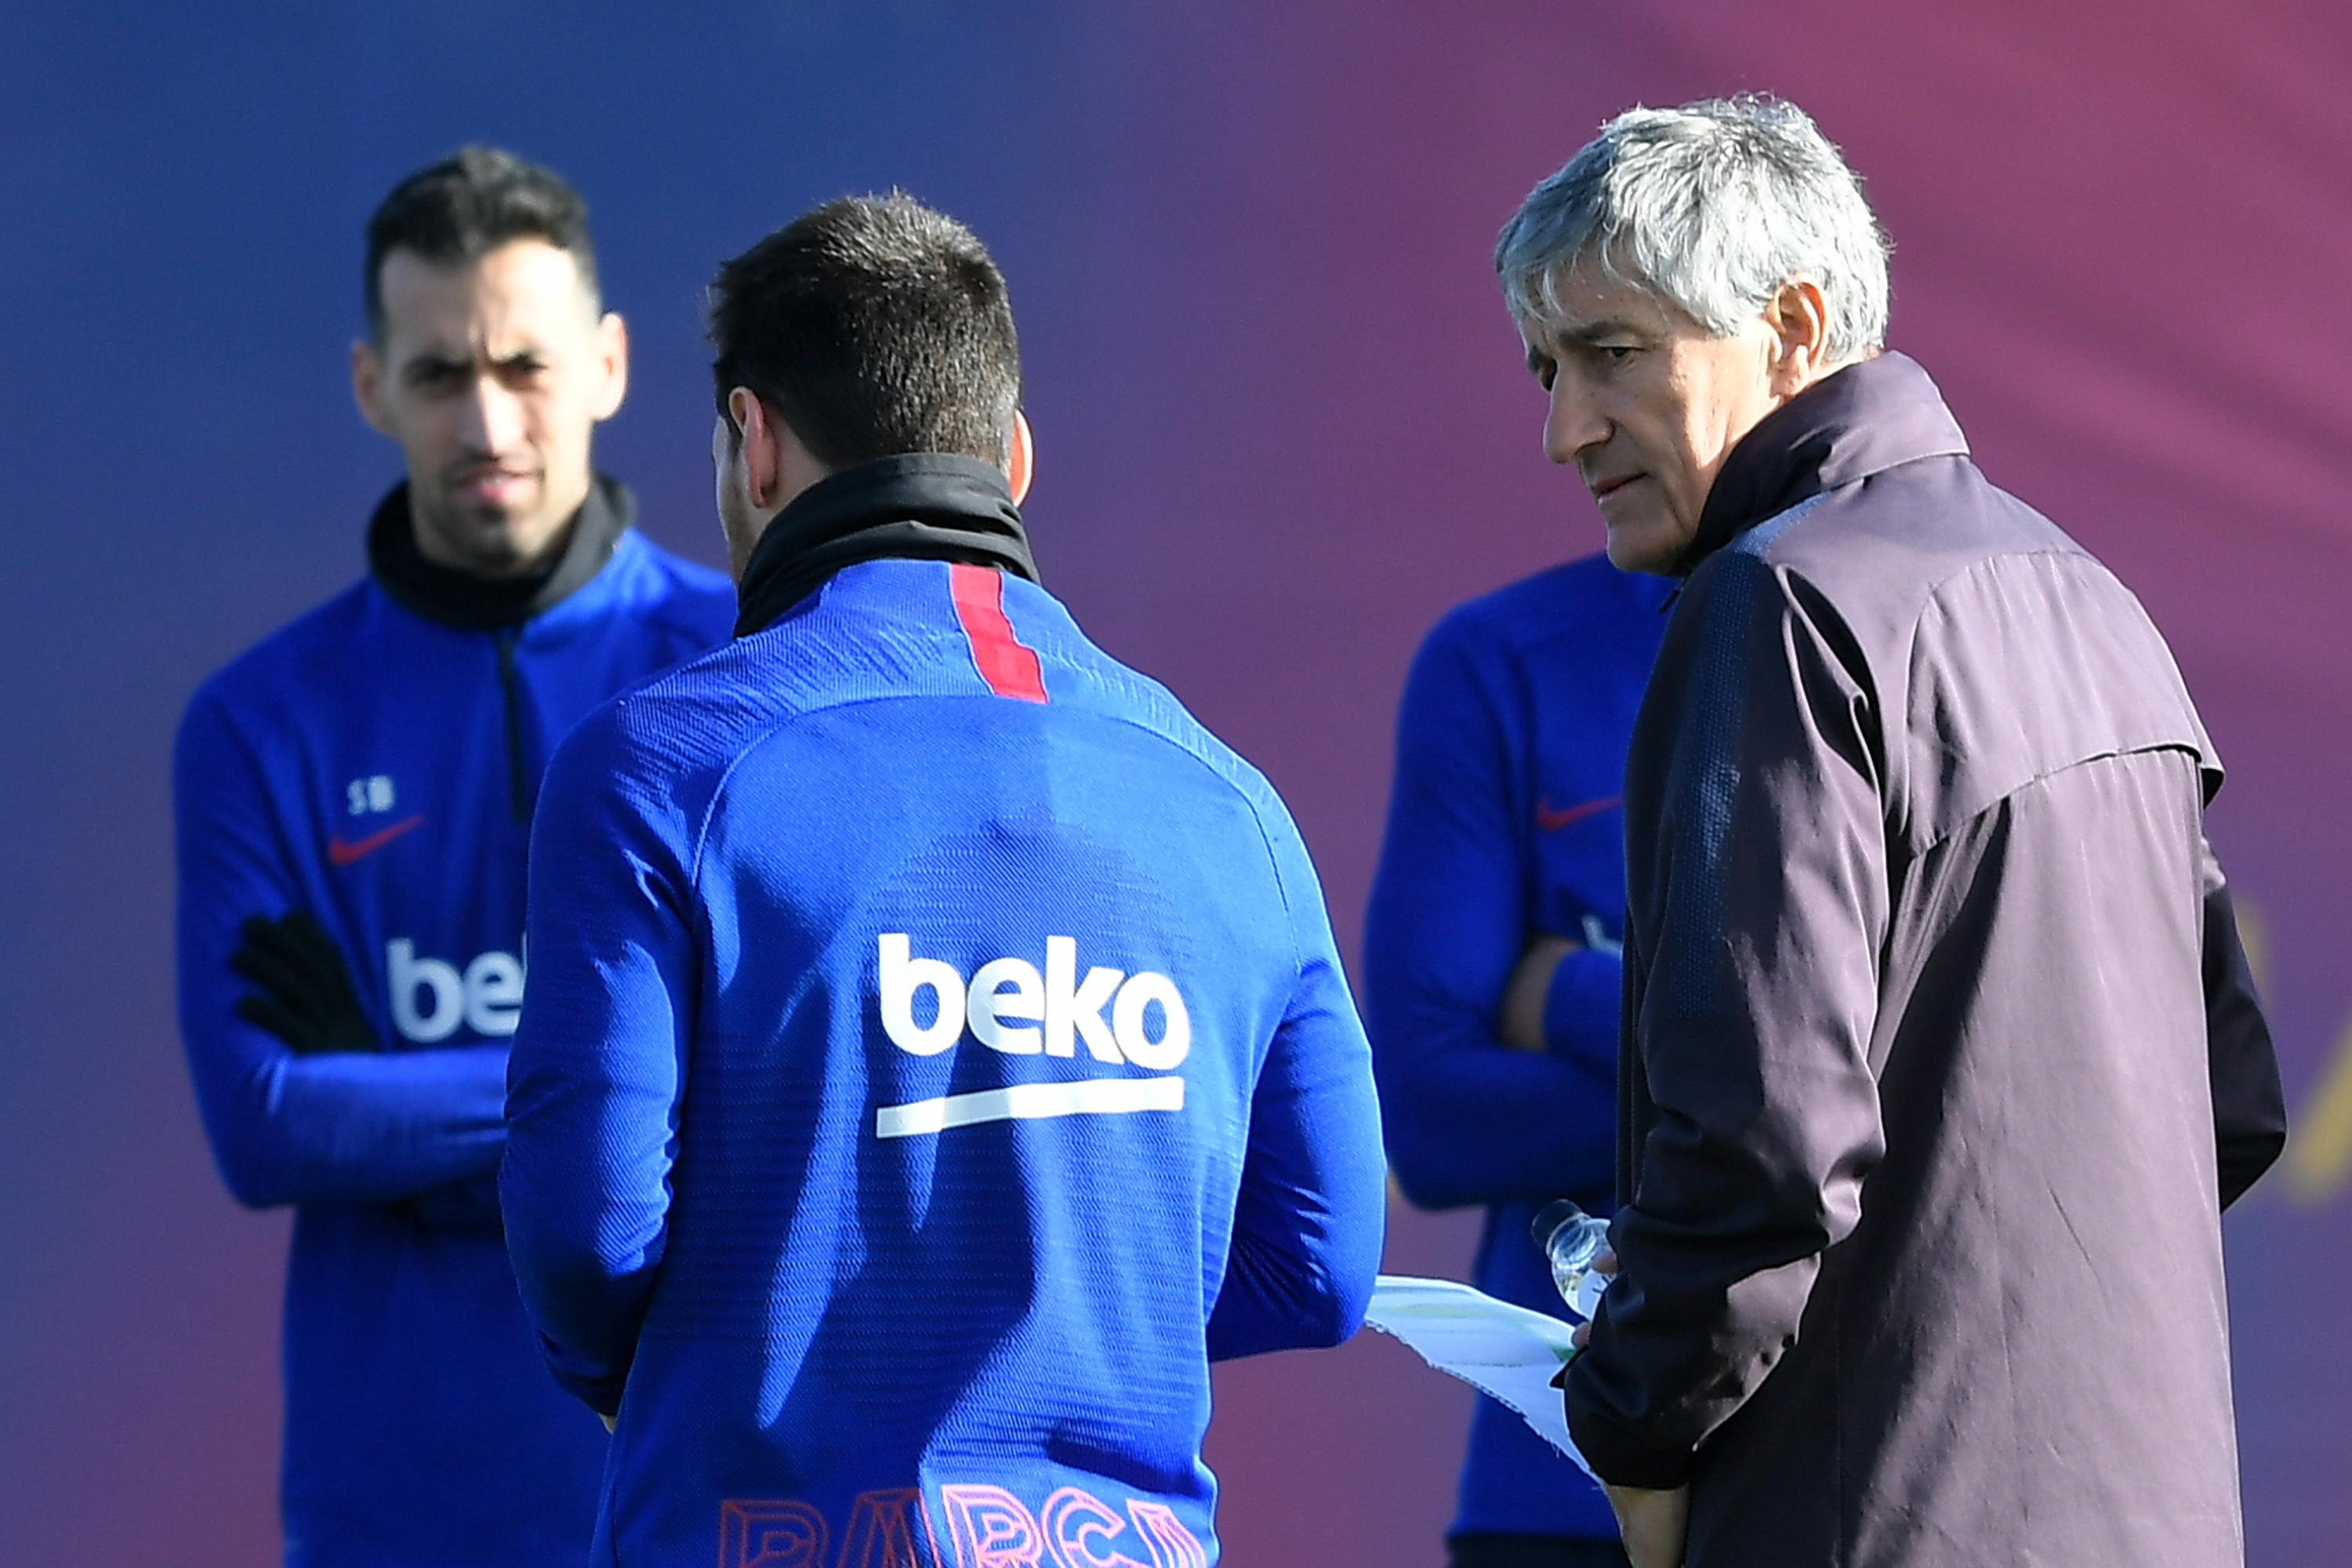 Barcelona's new coach, Spaniard Quique Setien (R), looks at Barcelona's Argentine forward Lionel Messi beside Barcelona's Spanish midfielder Sergio Busquets (L) during a training session at the Joan Gamper Sports City training ground in Sant Joan Despi on January 18, 2020. (Photo by LLUIS GENE / AFP) (Photo by LLUIS GENE/AFP via Getty Images)